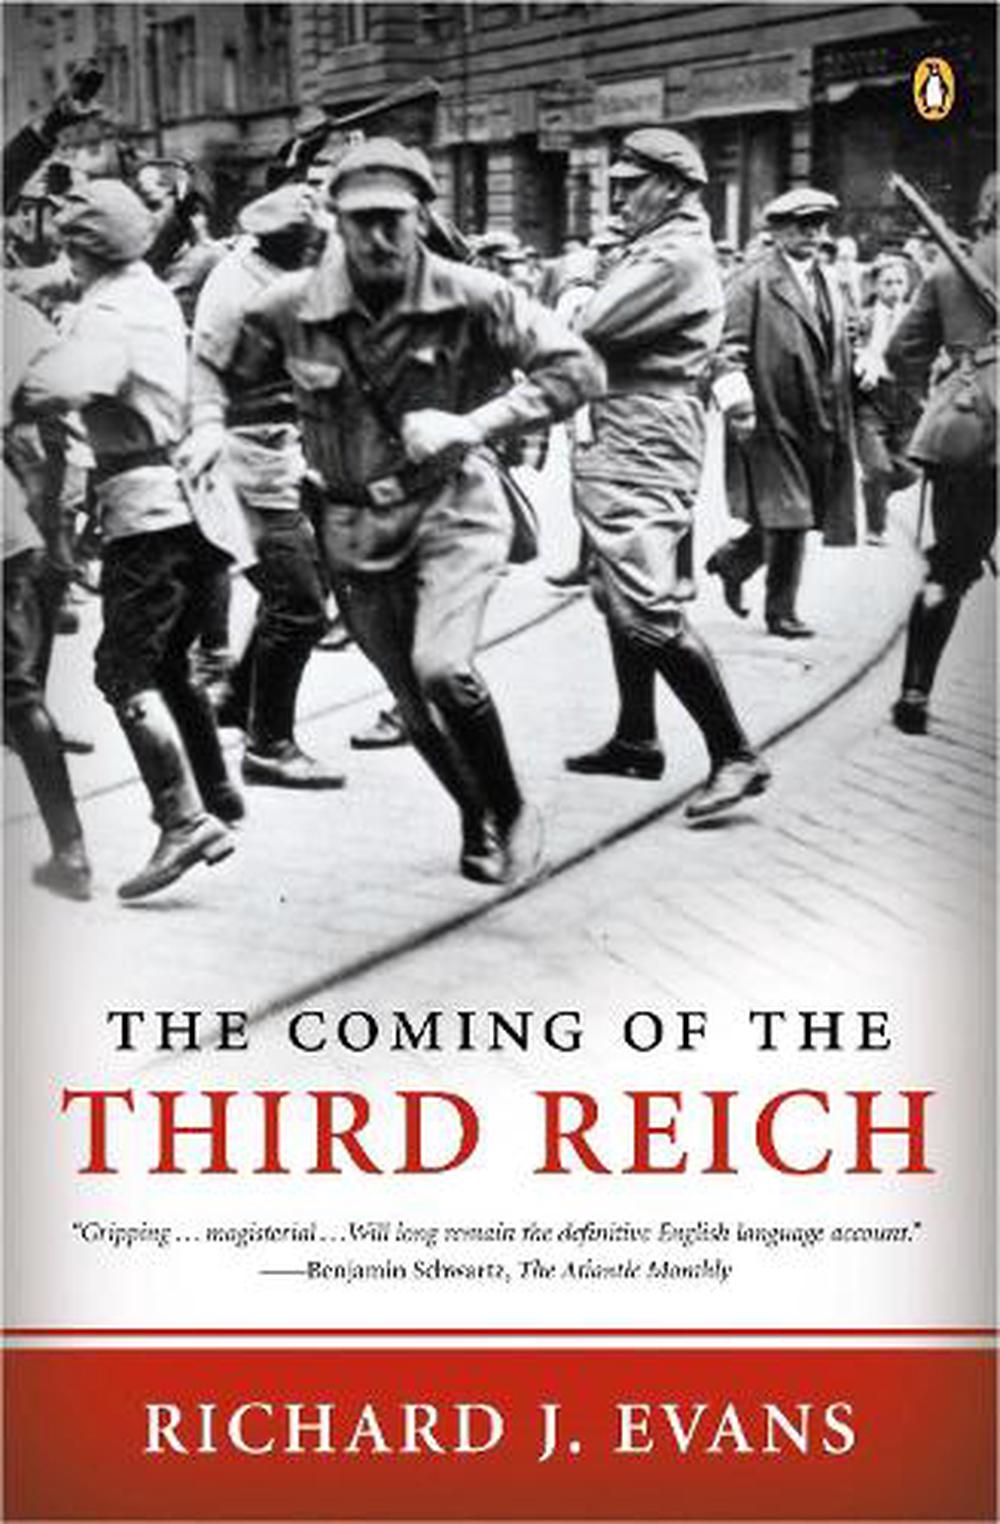 The Coming of the Third Reich by Richard J. Evans, Paperback